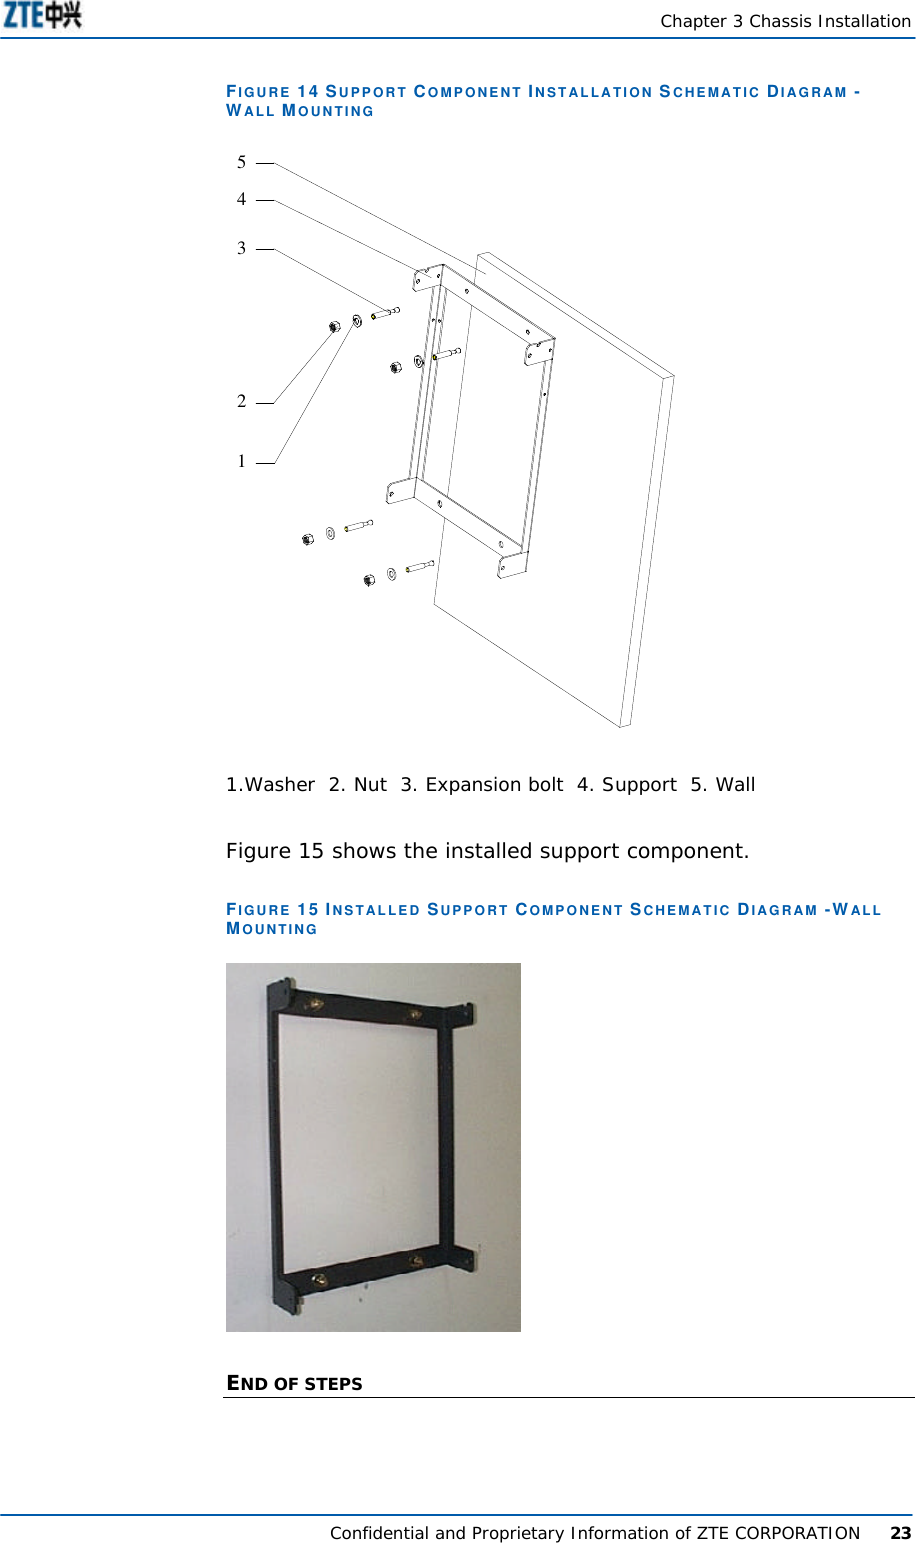   Chapter 3 Chassis Installation  Confidential and Proprietary Information of ZTE CORPORATION      23 FIGURE 14 SUPPORT COMPONENT INSTALLATION SCHEMATIC DIAGRAM -WALL MOUNTING 12345 1.Washer  2. Nut  3. Expansion bolt  4. Support  5. Wall  Figure 15 shows the installed support component.  FIGURE 15 INSTALLED SUPPORT COMPONENT SCHEMATIC DIAGRAM -WALL MOUNTING  END OF STEPS 